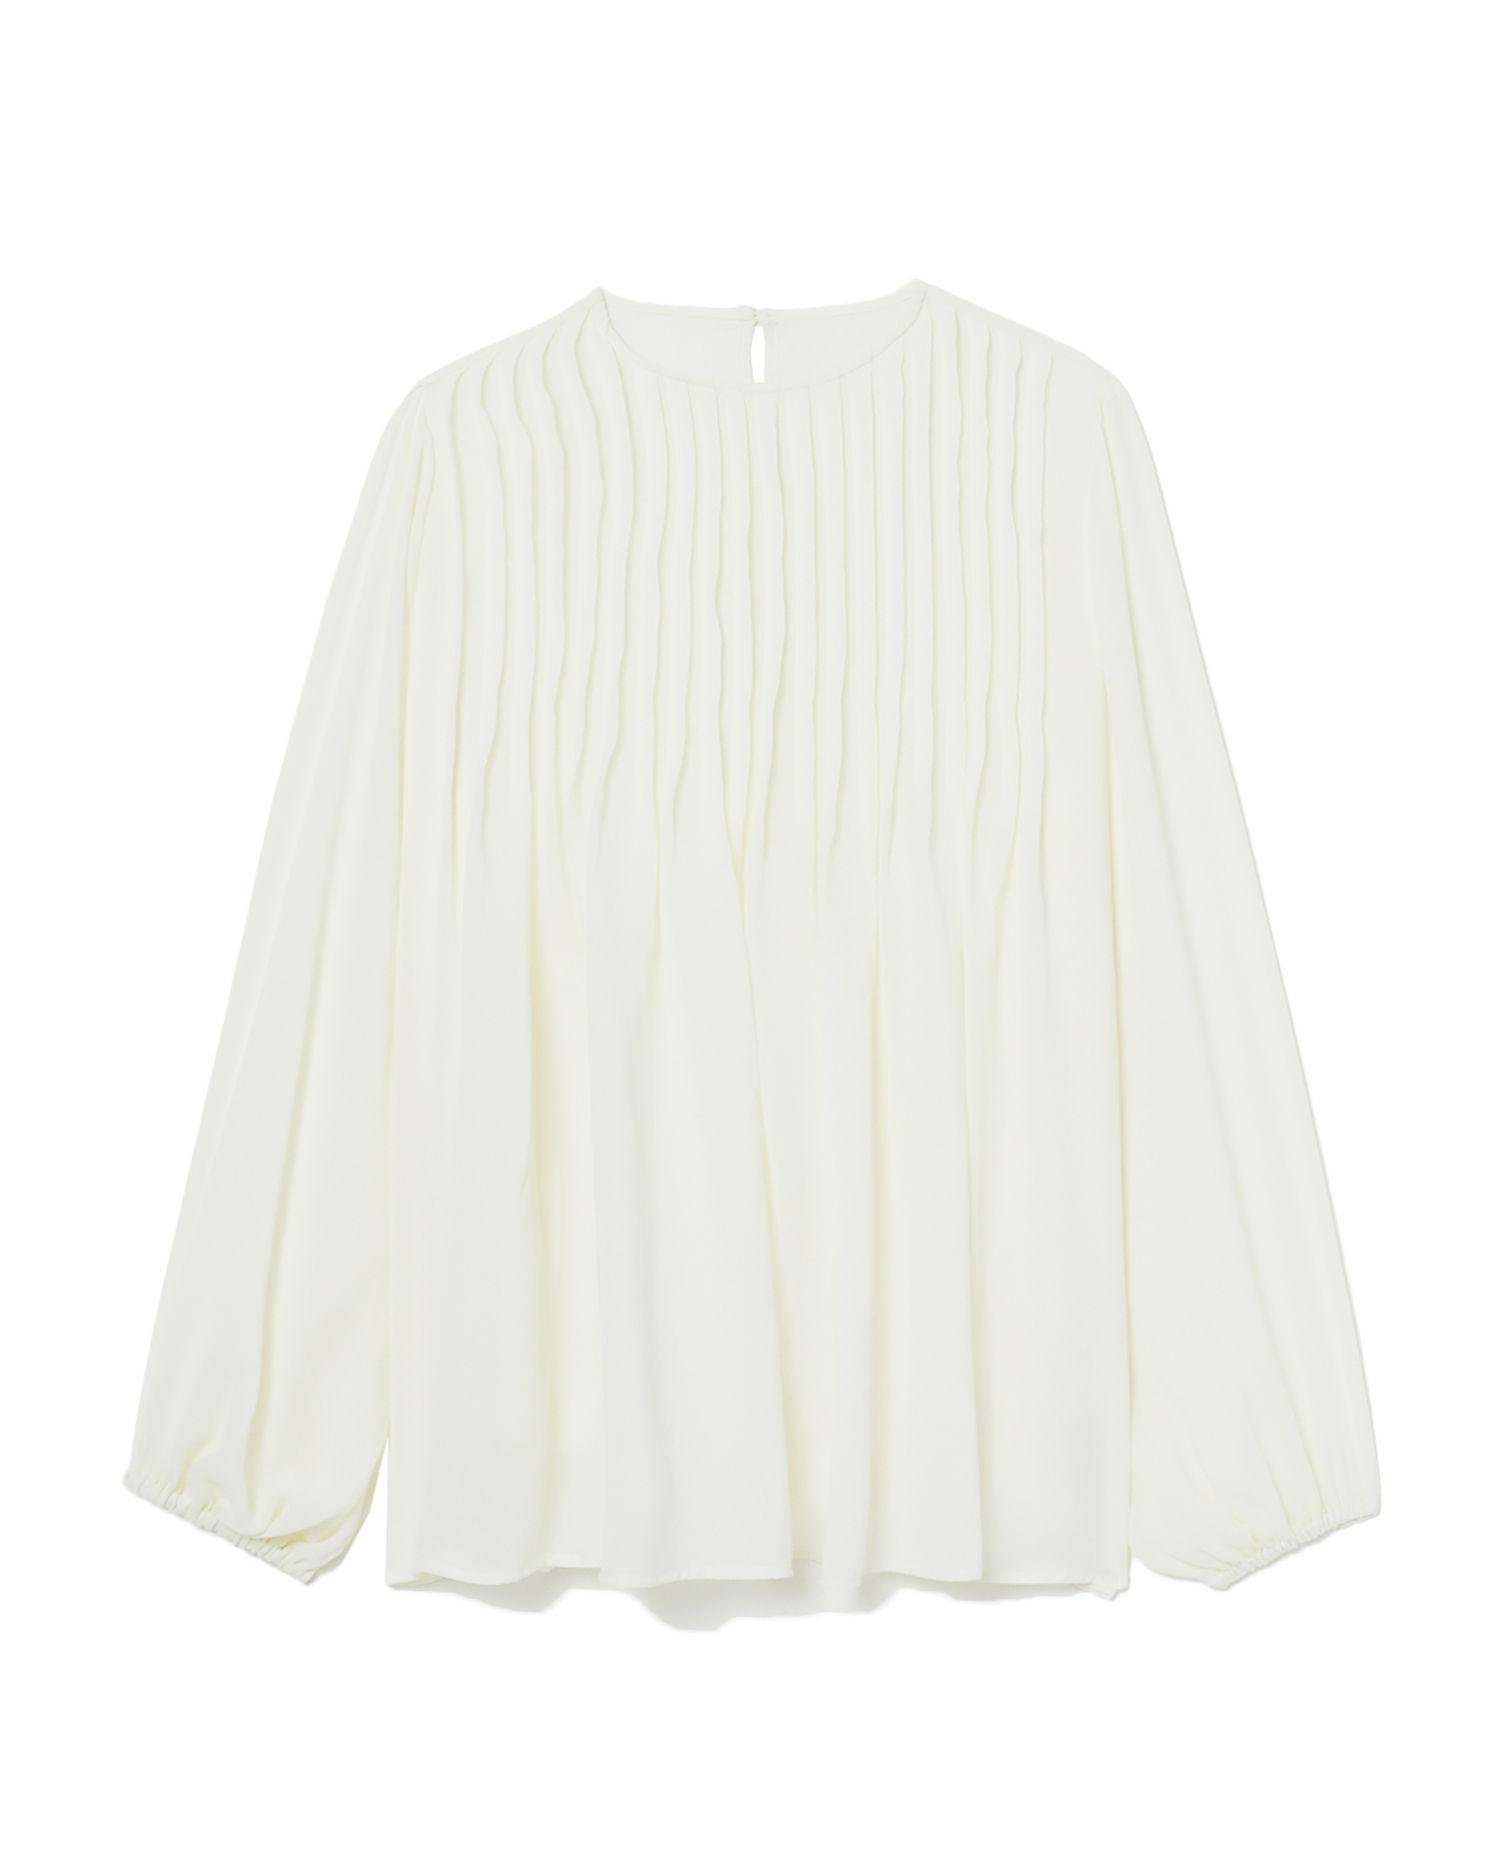 Relaxed ruffled top by AMERICAN HOLIC